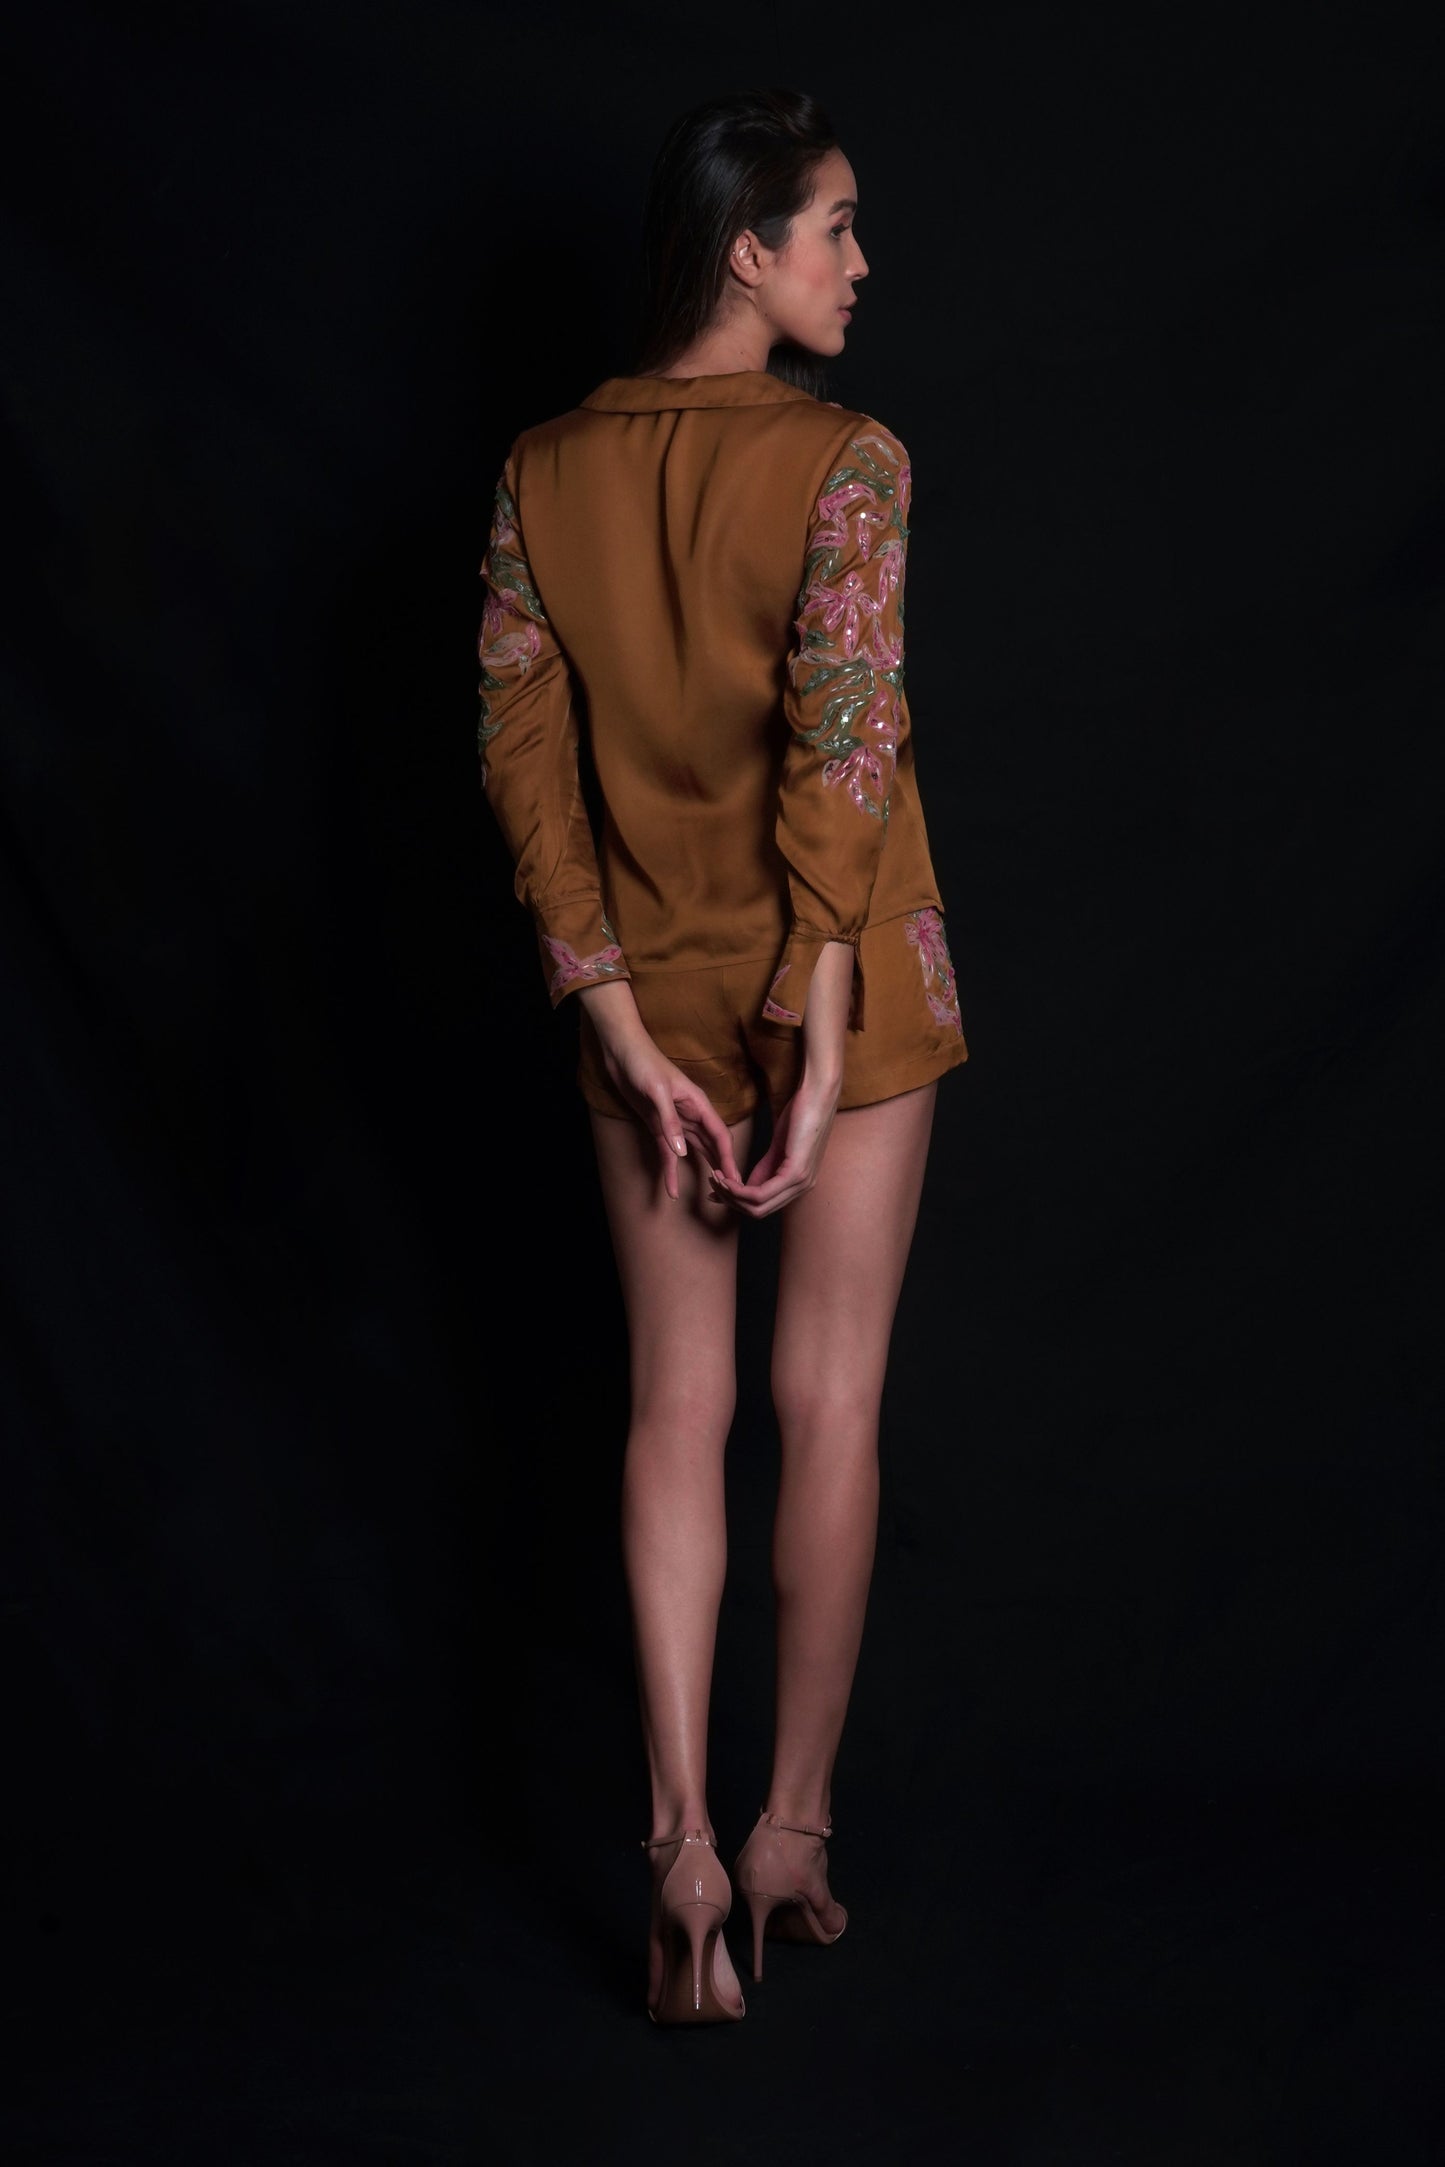 Golden Brown Top With Embroidery